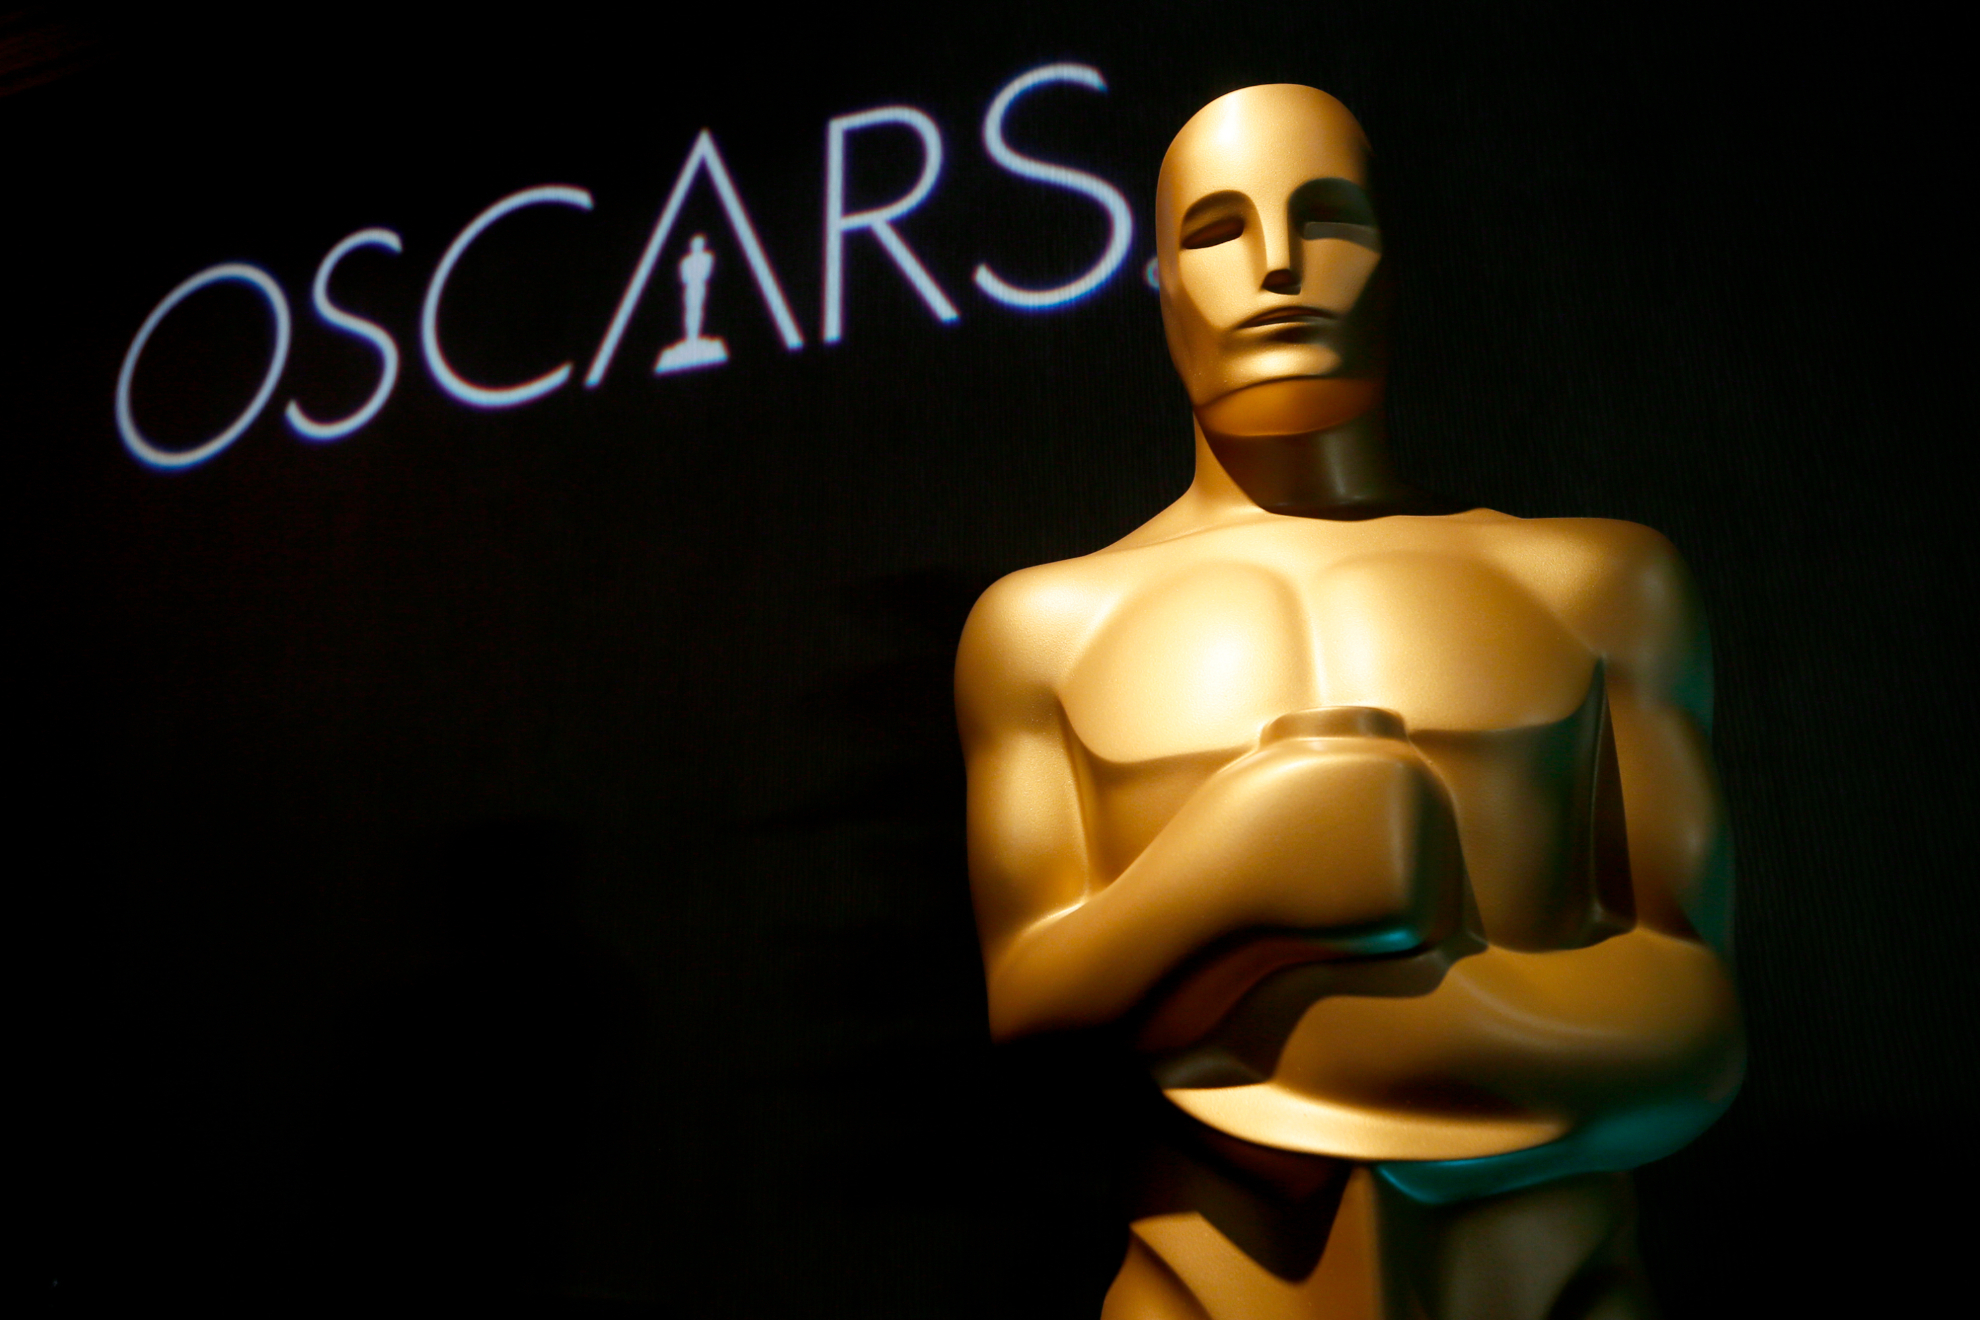 The 95th Academy Awards will be held this Sunday.